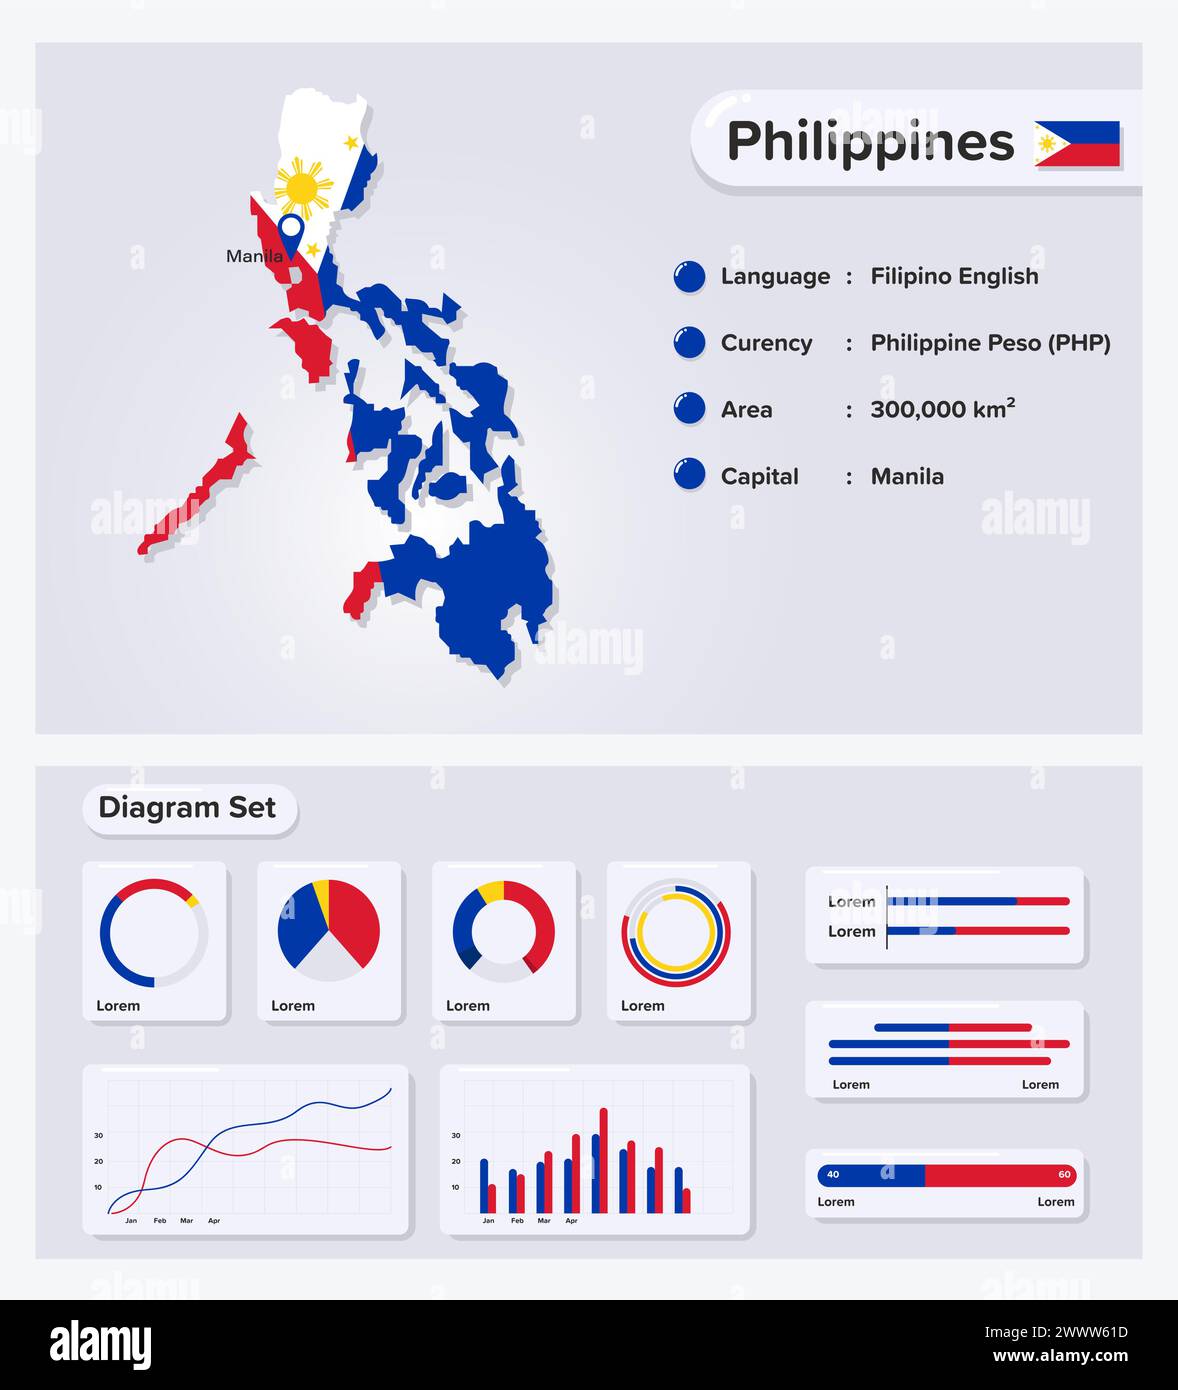 Philippines Infographic Vector Illustration, Philippines Statistical Data Element, Information Board With Flag Map, Philippines Map Flag With Diagram Stock Vector